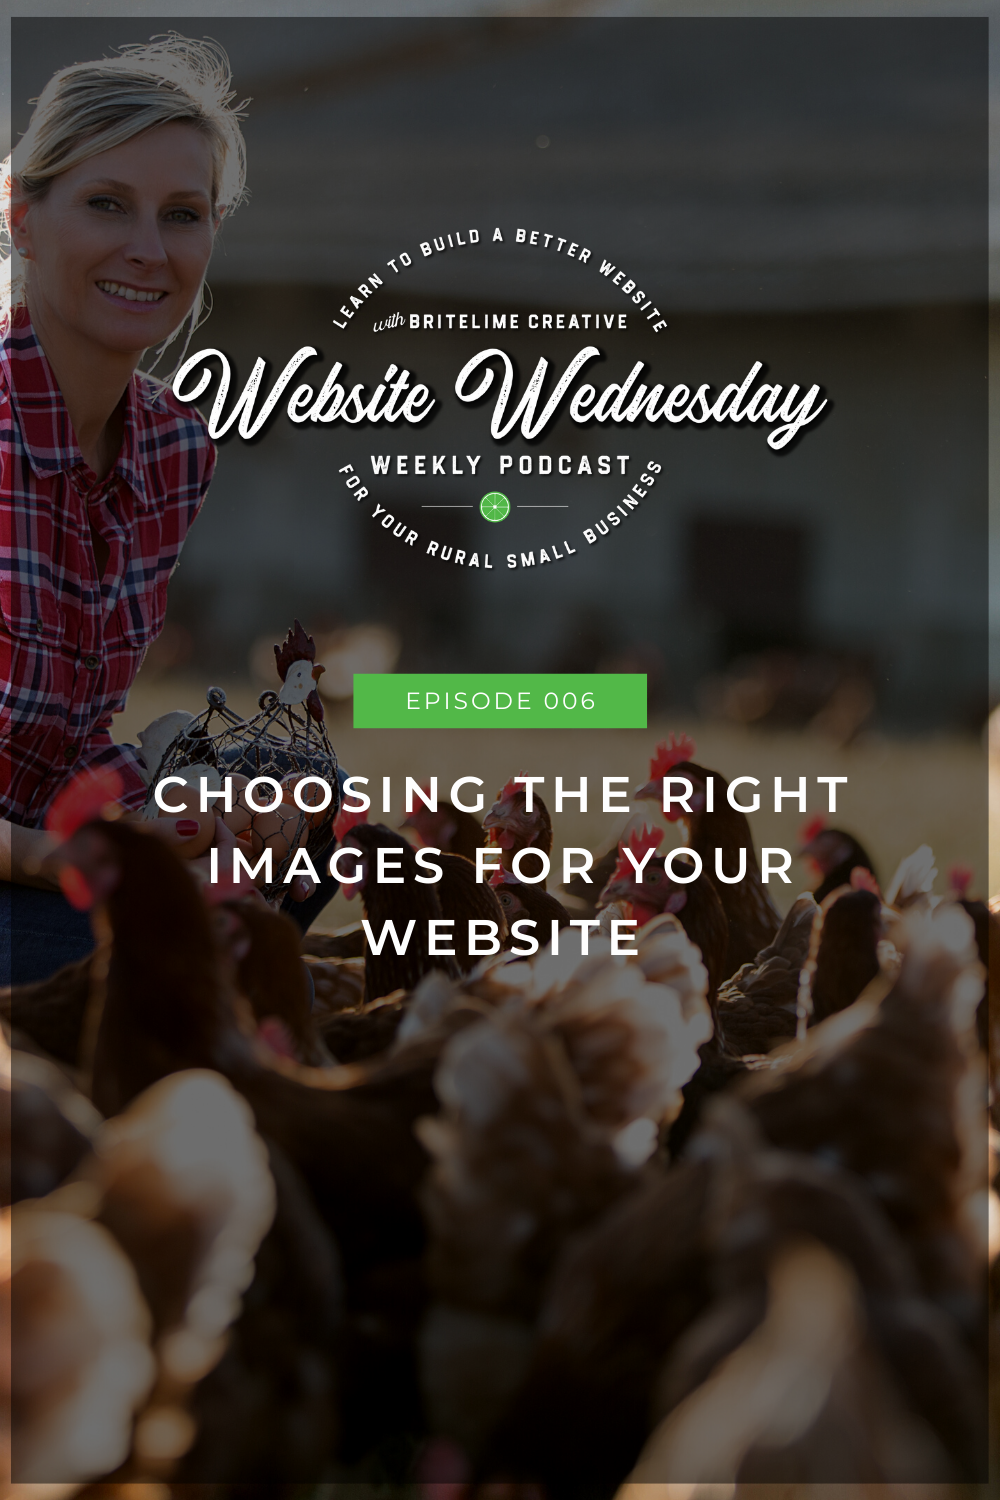 Image of a woman with lots of chickens and a basket full of eggs with an opaque black rectangle over the image and text that reads: Episode 006, Choosing the Right Images for Your Website